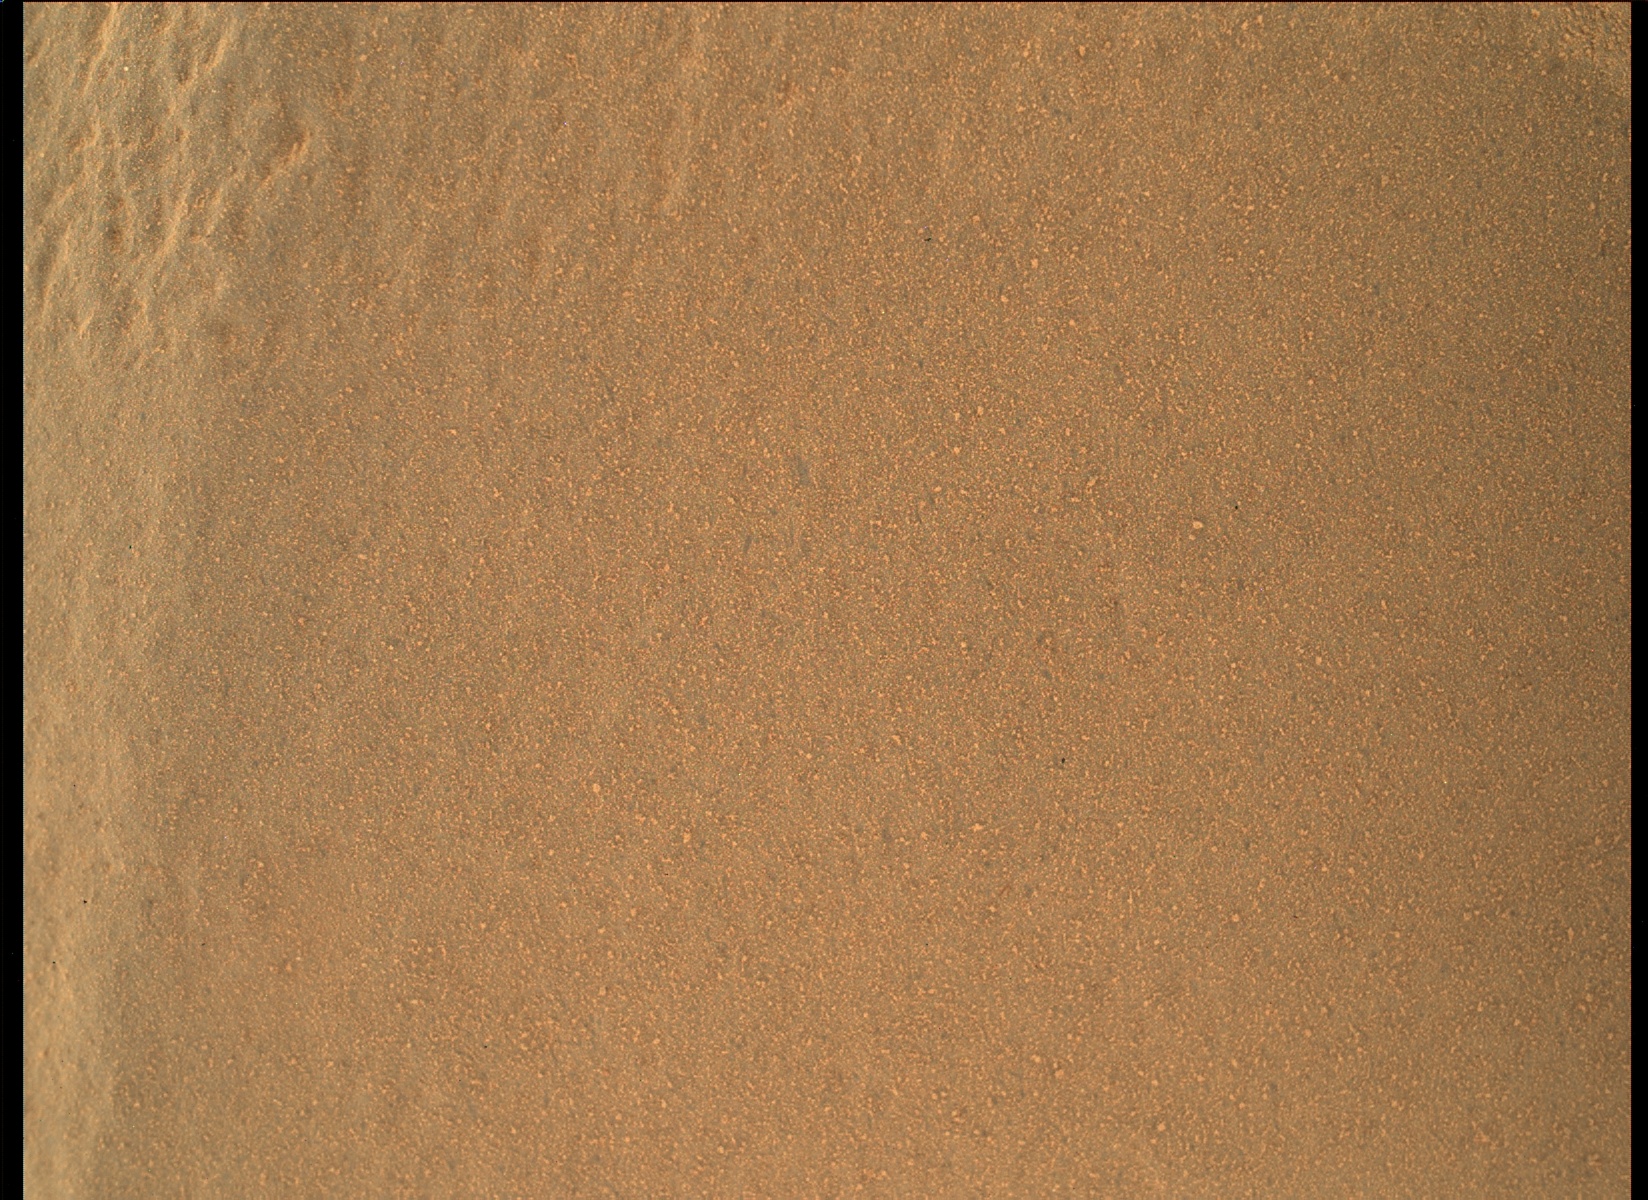 Nasa's Mars rover Curiosity acquired this image using its Mars Hand Lens Imager (MAHLI) on Sol 54